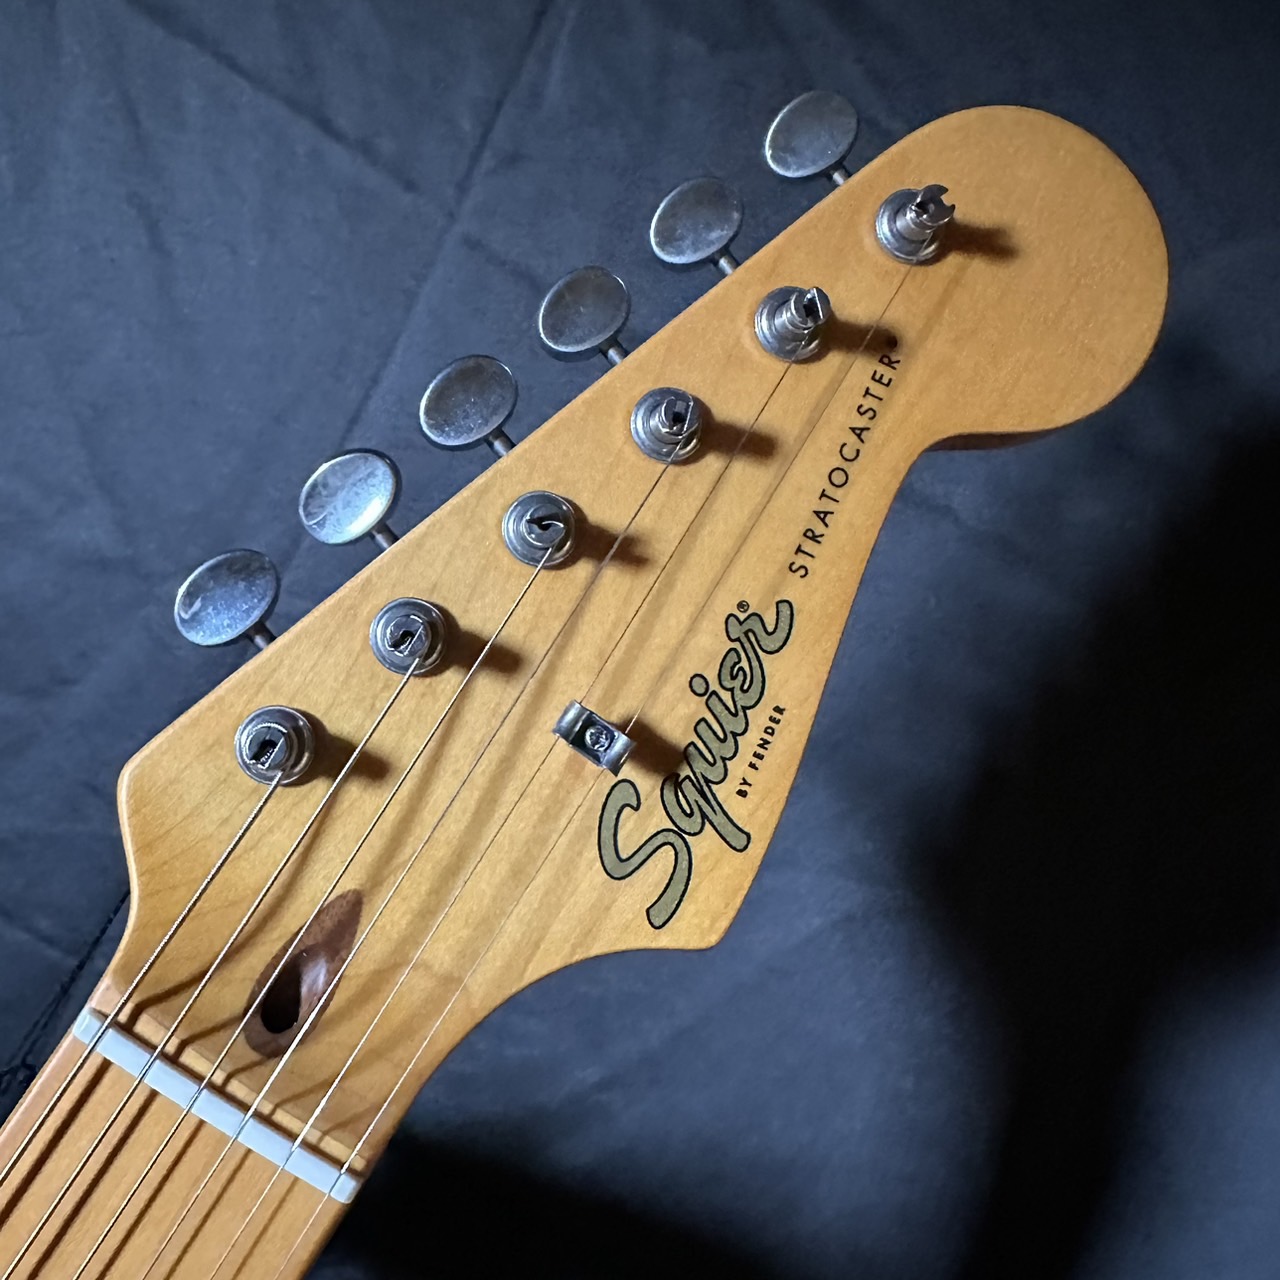 Squier by Fender 40th Anniversary Stratocaster Vintage Edition